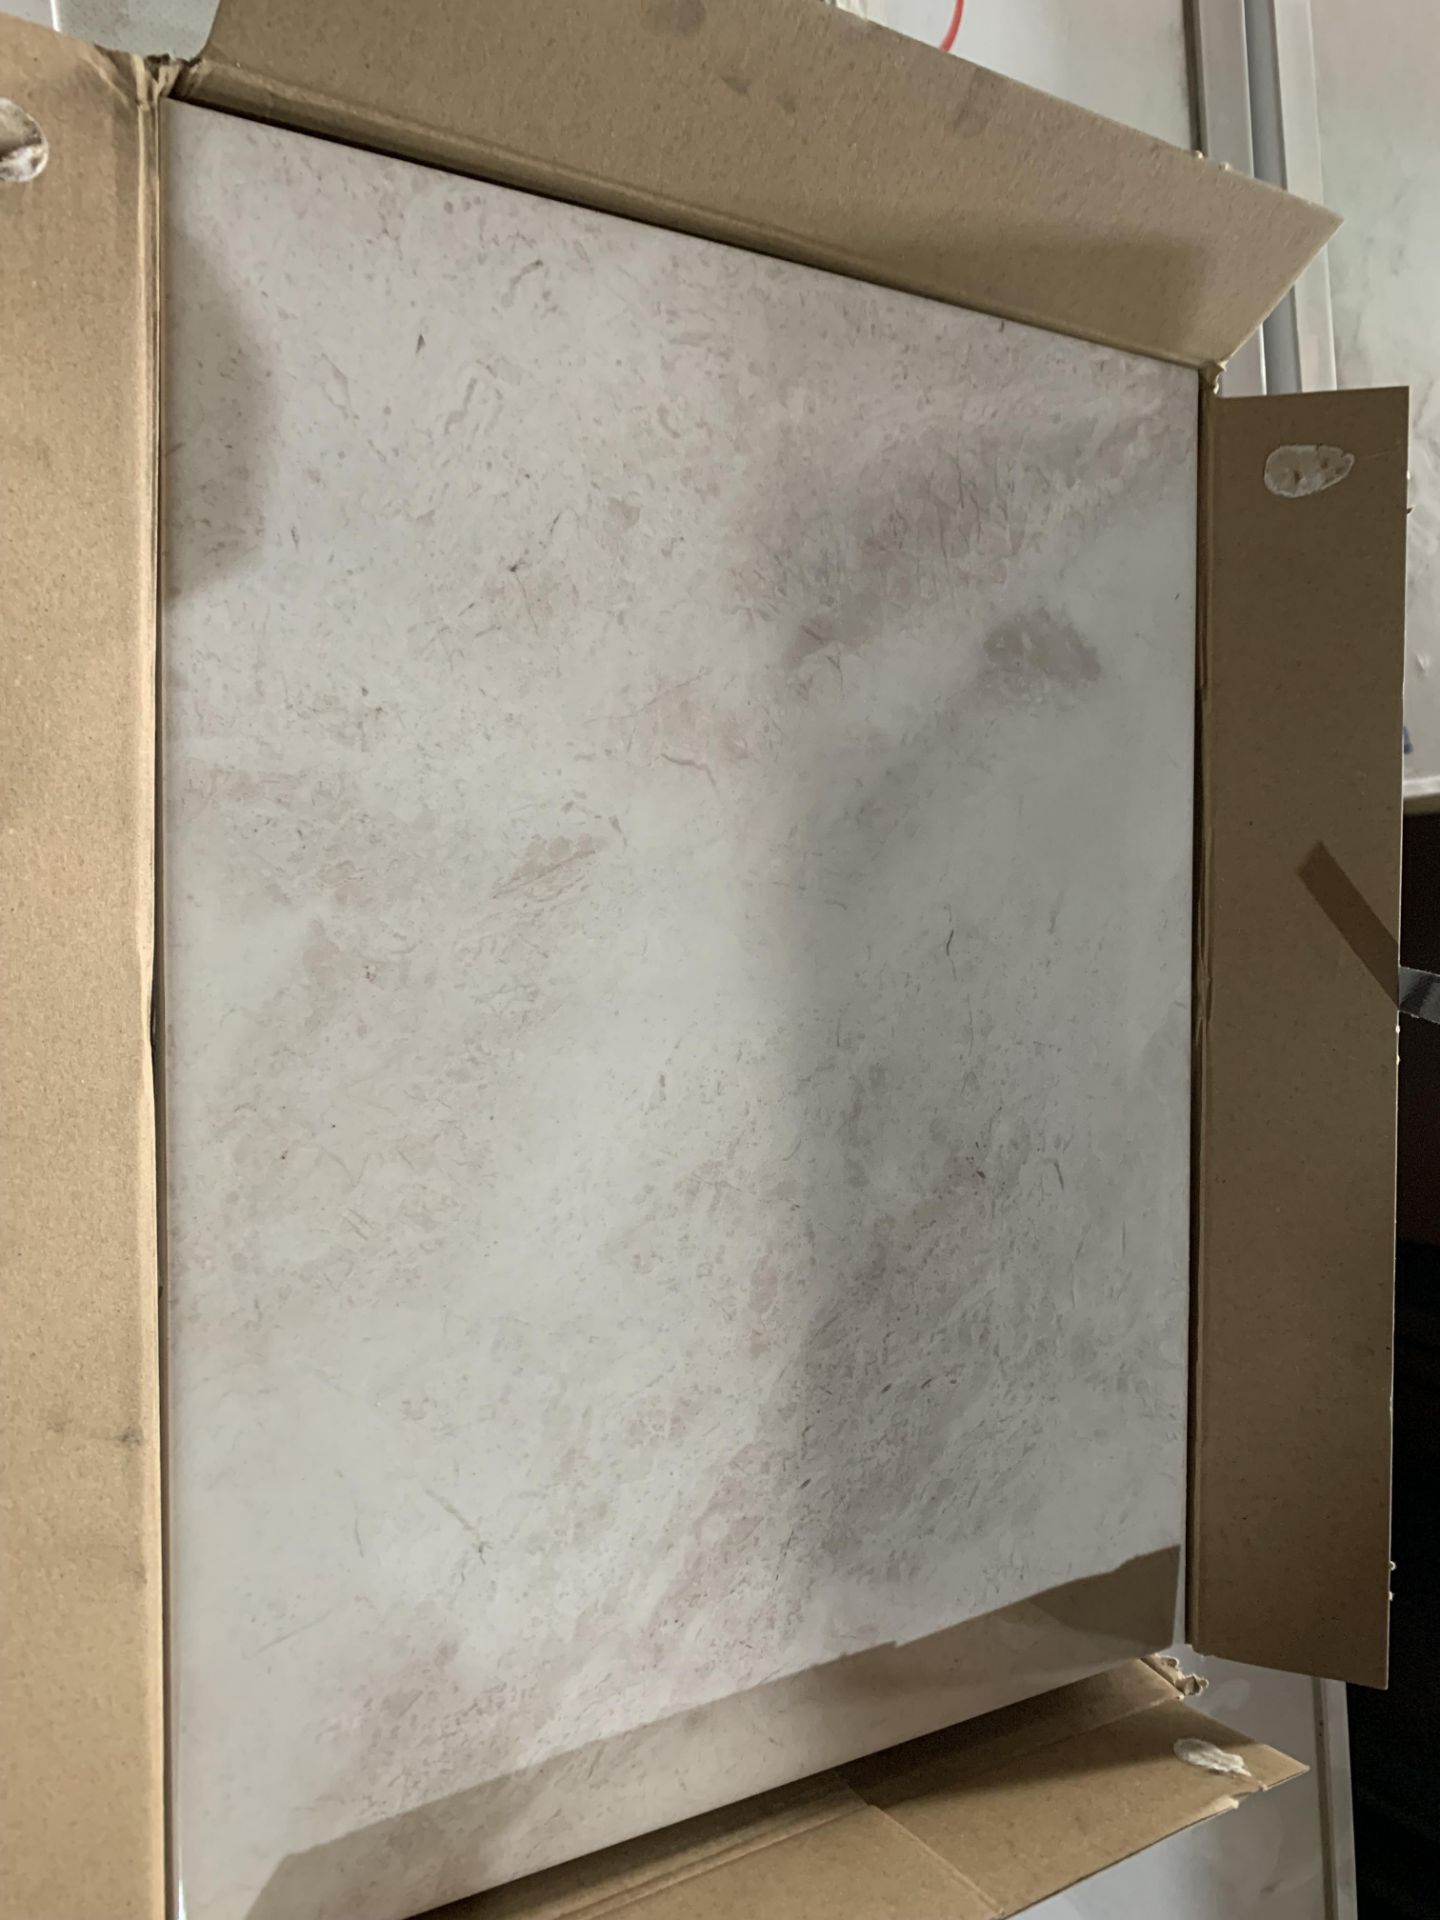 10 x PACKS OF Illusion White Marble Effect Glazed Ceramic Wall and Floor Tiles. Each pack contains